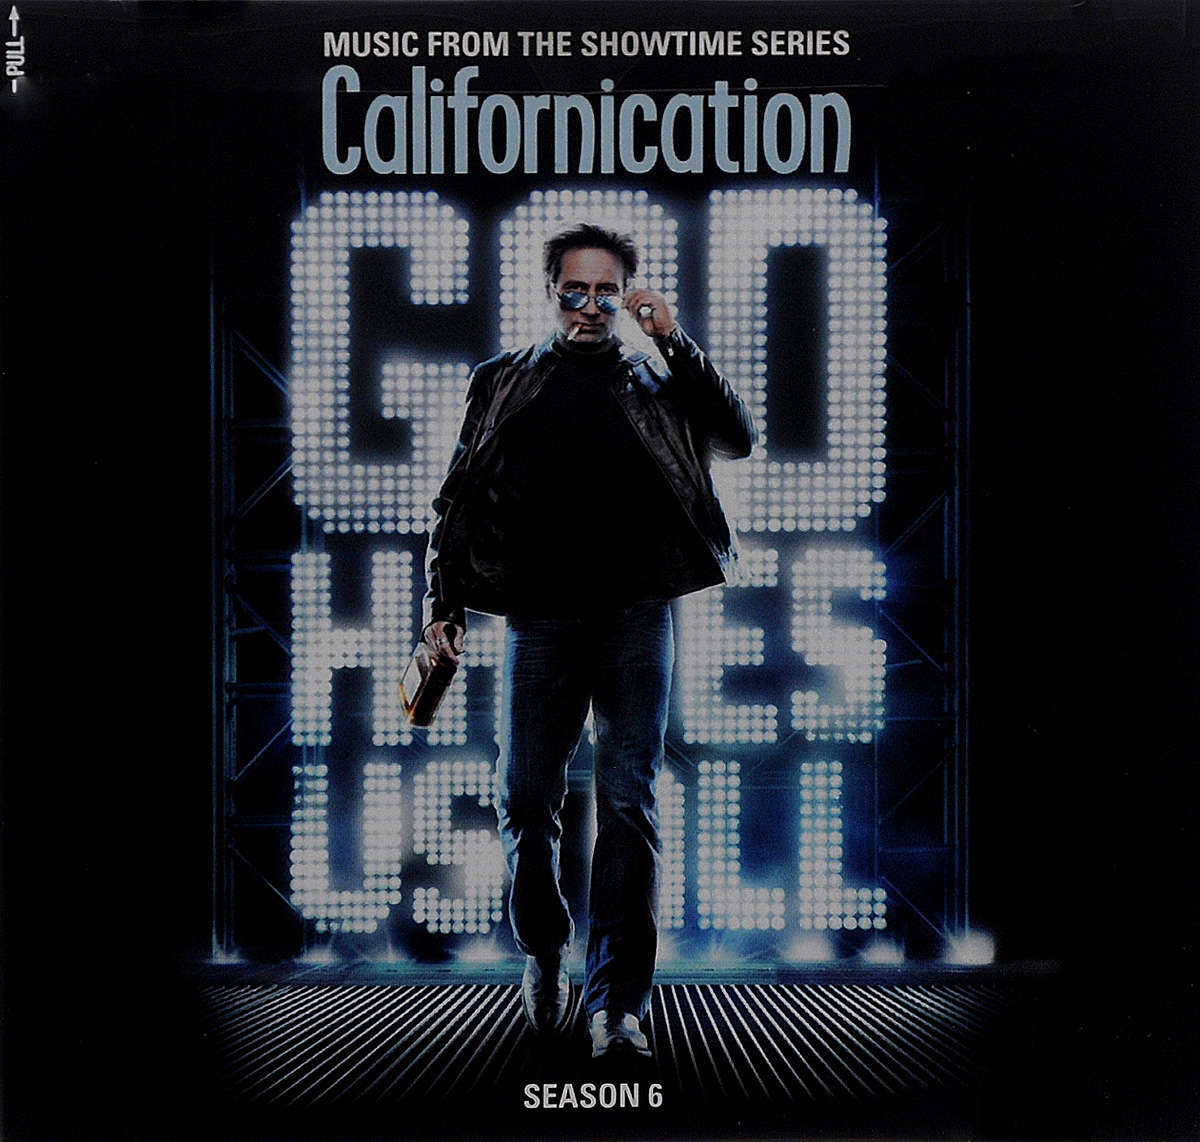 Californication. Season 6. Music From The Showtime Series. Original Soundtrack